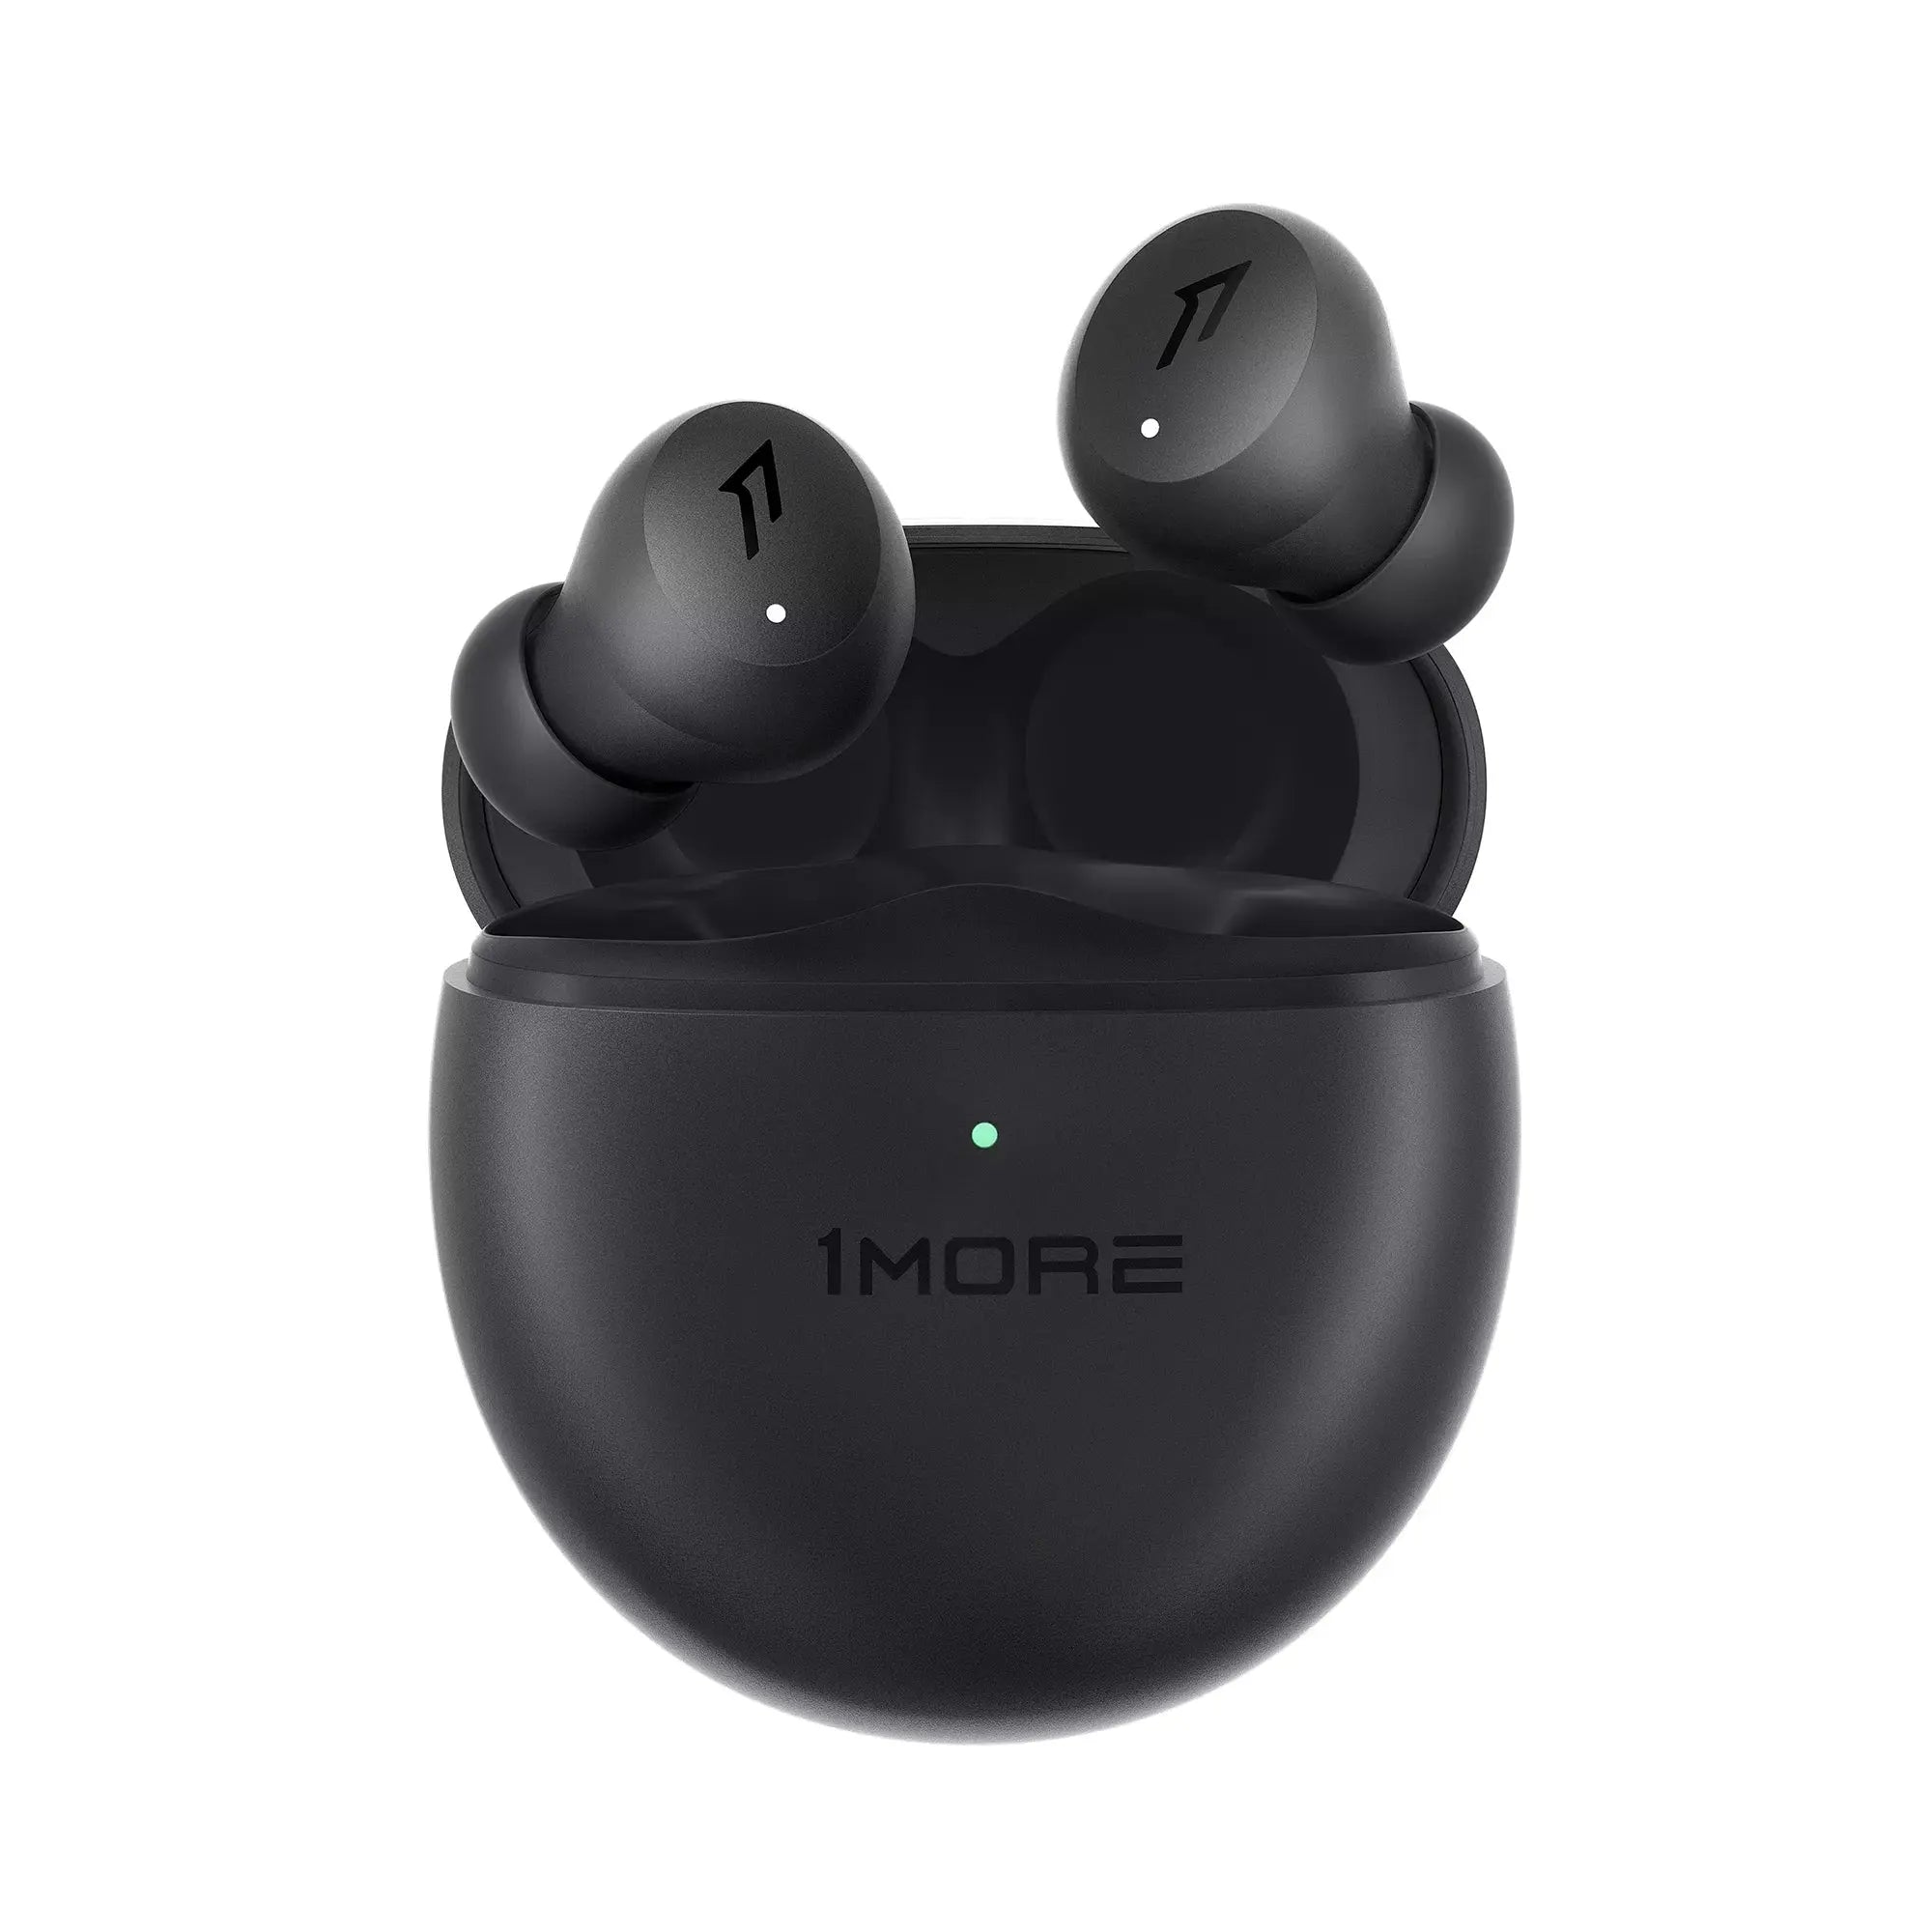  Sony WF-1000XM4 Noise-Canceling True Wireless In-Ear Headphones  (Black) - Water Resistant Earbuds with Exceptional Sound Quality and  Superior Call Quality : Electronics